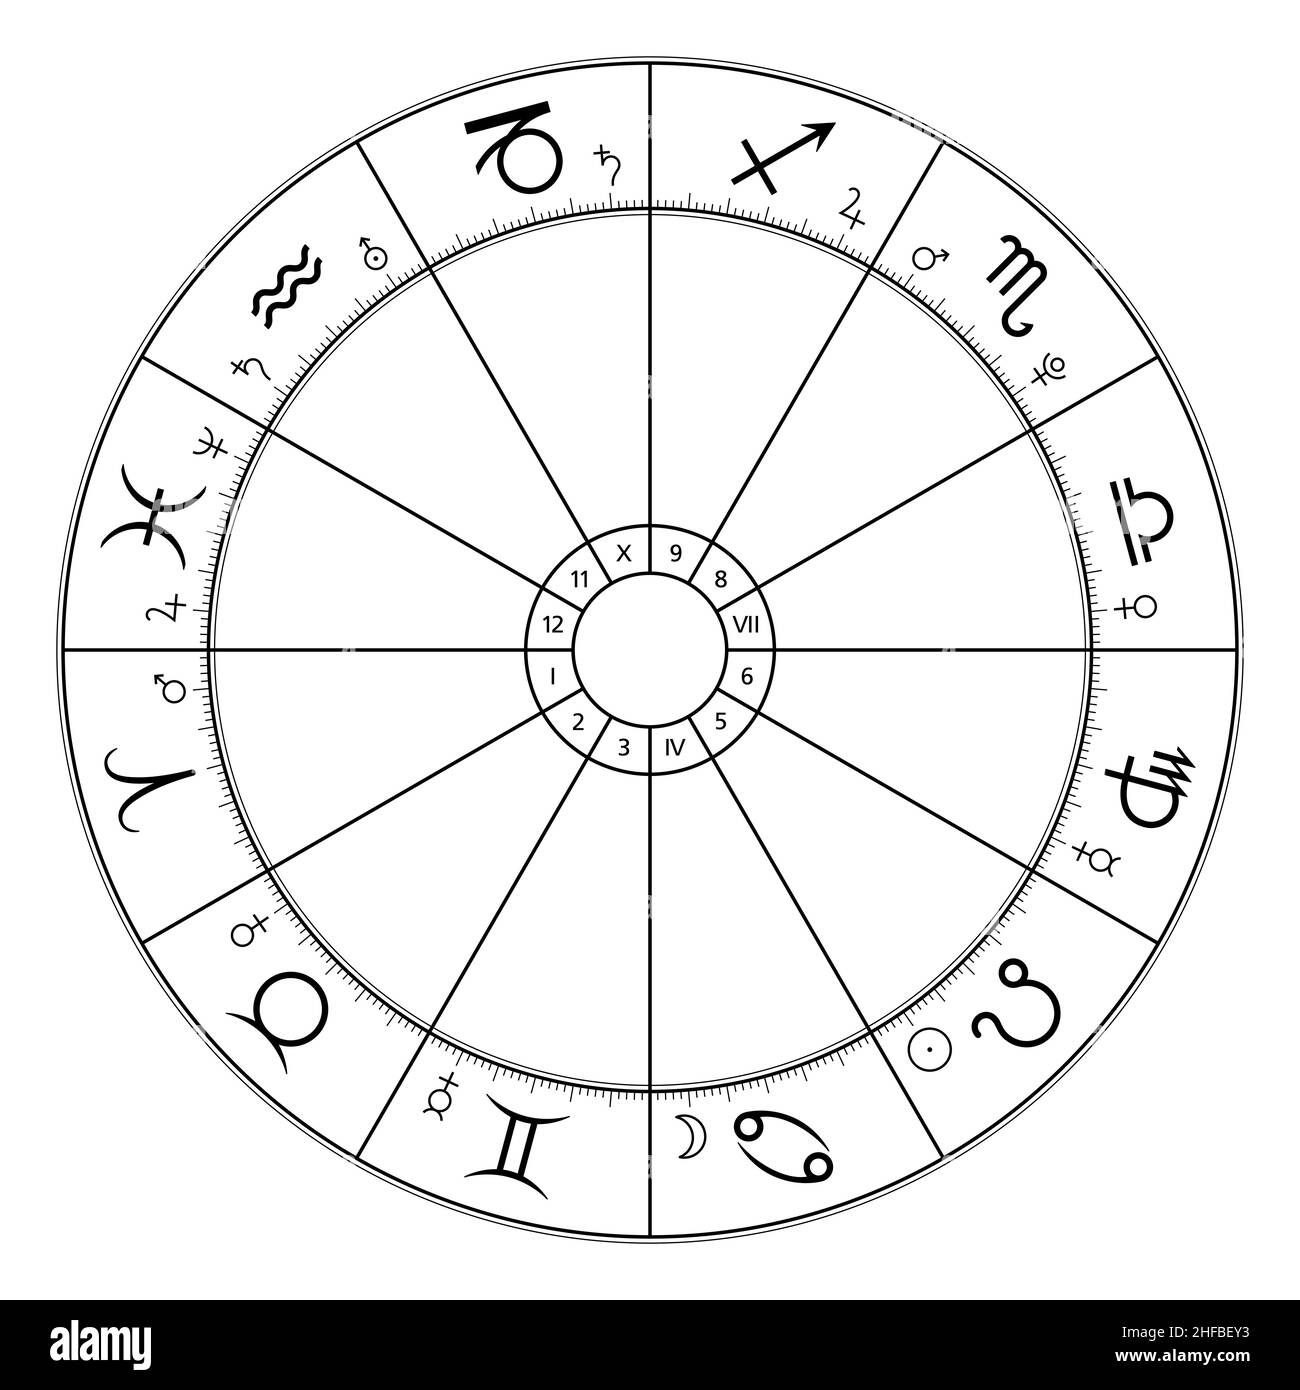 Zodiac circle, astrological chart, showing twelve star signs, and belonging planet symbols. Wheel of the zodiac, used in modern horoscopic astrology. Stock Photo